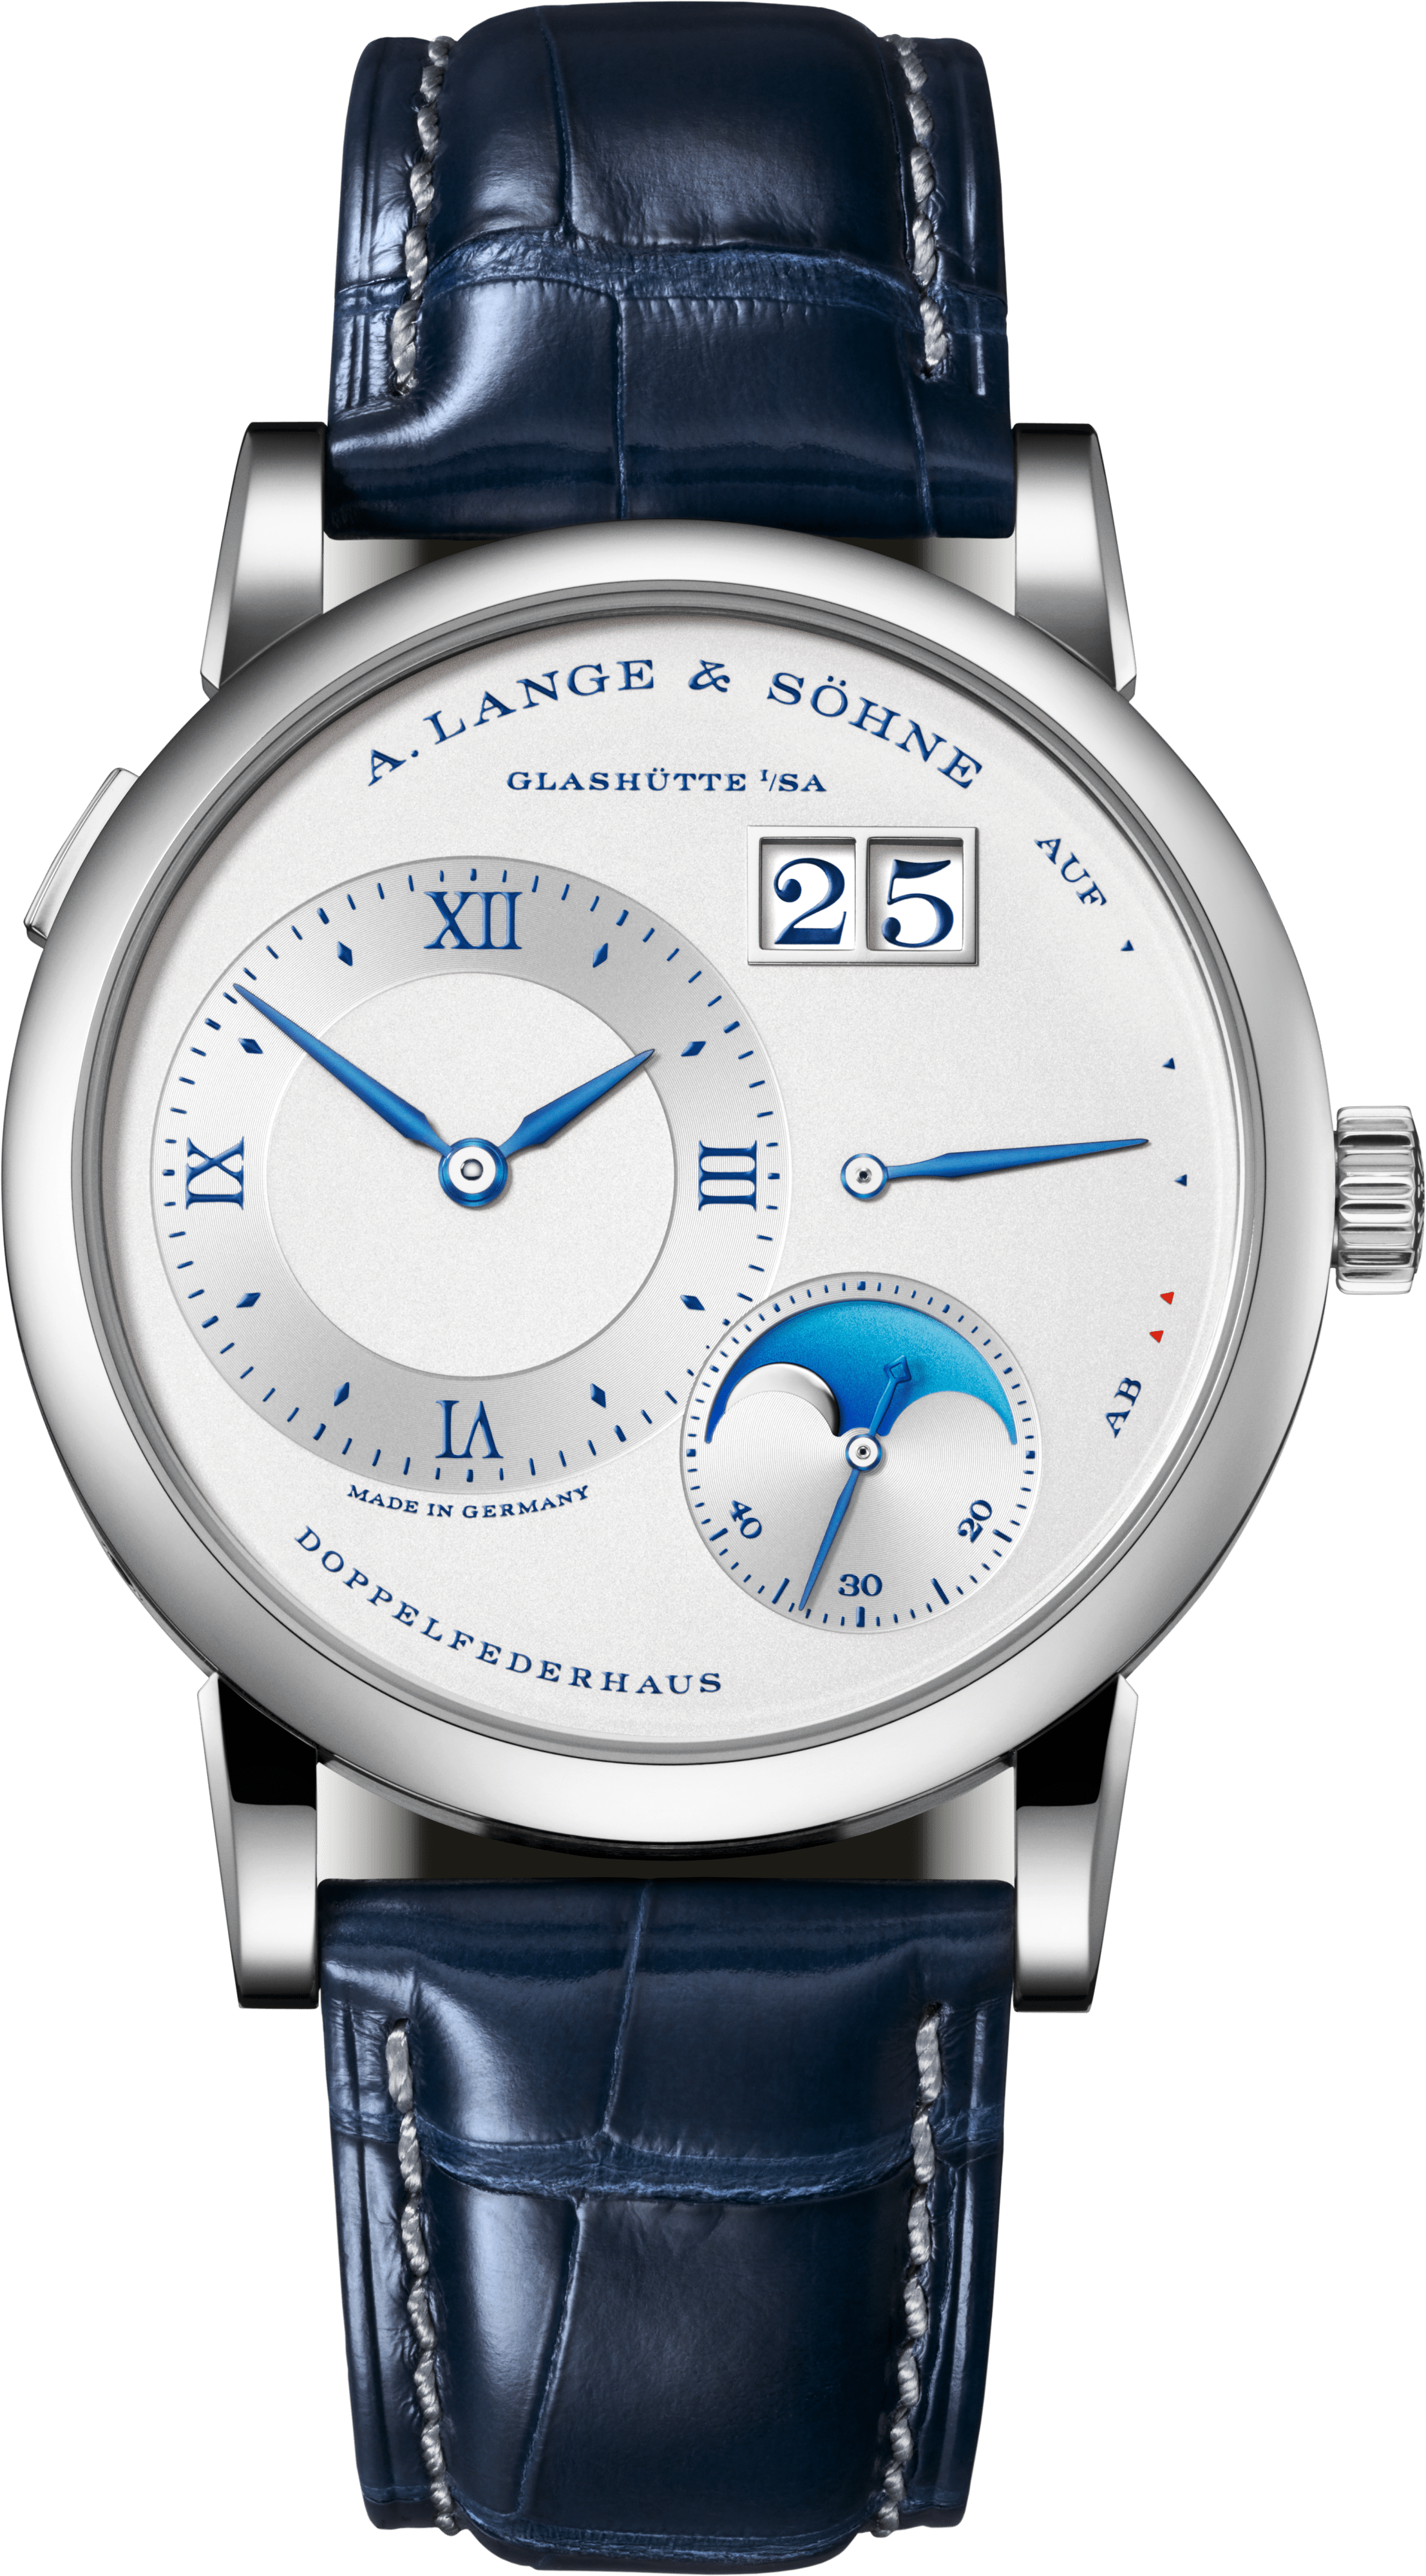 Replica Watches For Sale In Usa